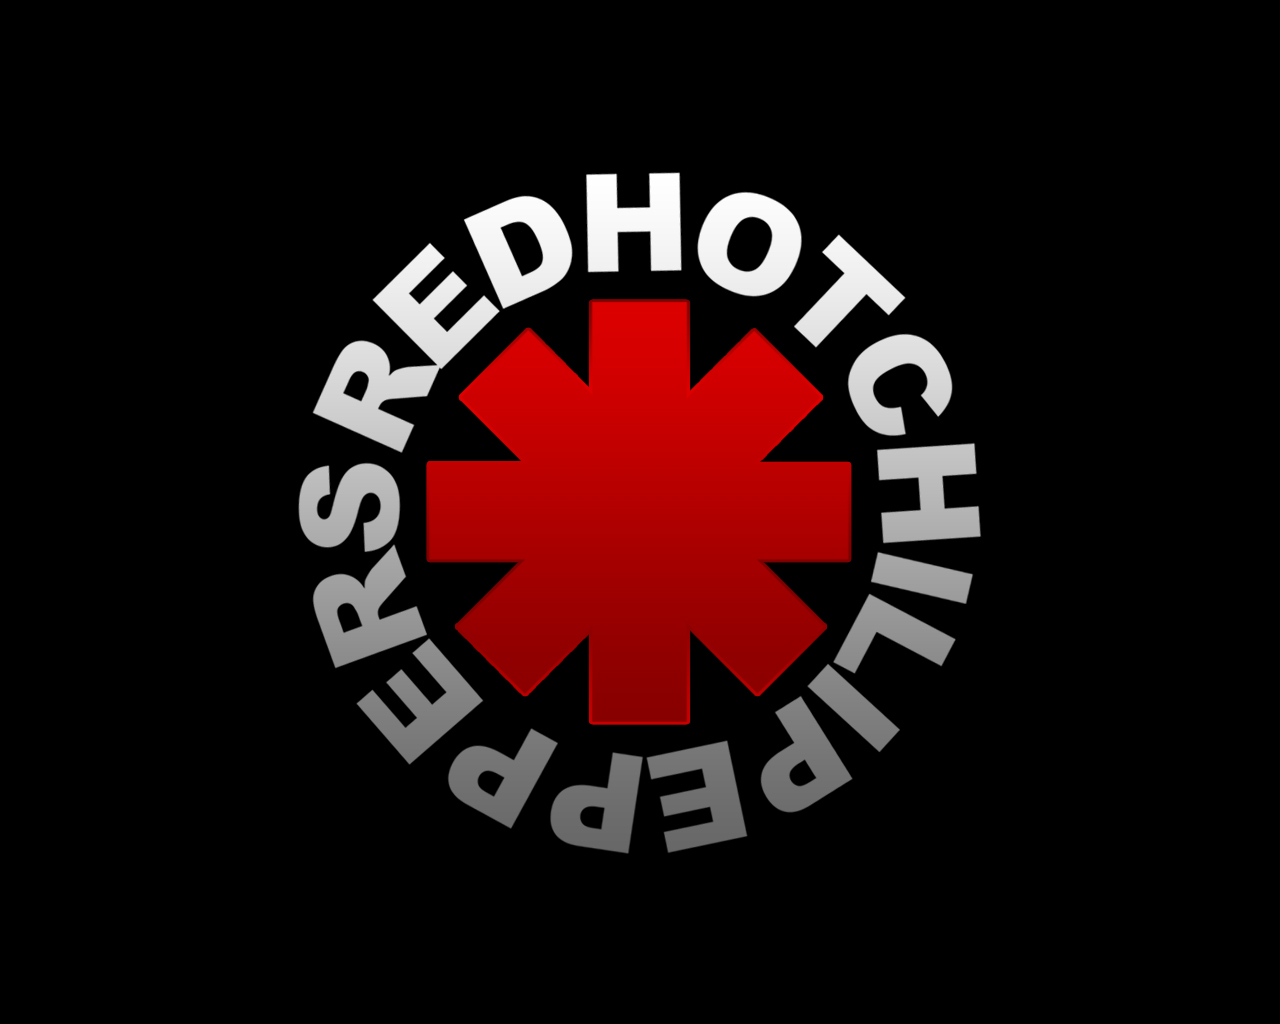 Red Best Chili Peppers Music Band Logo Hd Wallpaper - Red Hot Chili Peppers Sfondi - HD Wallpaper 